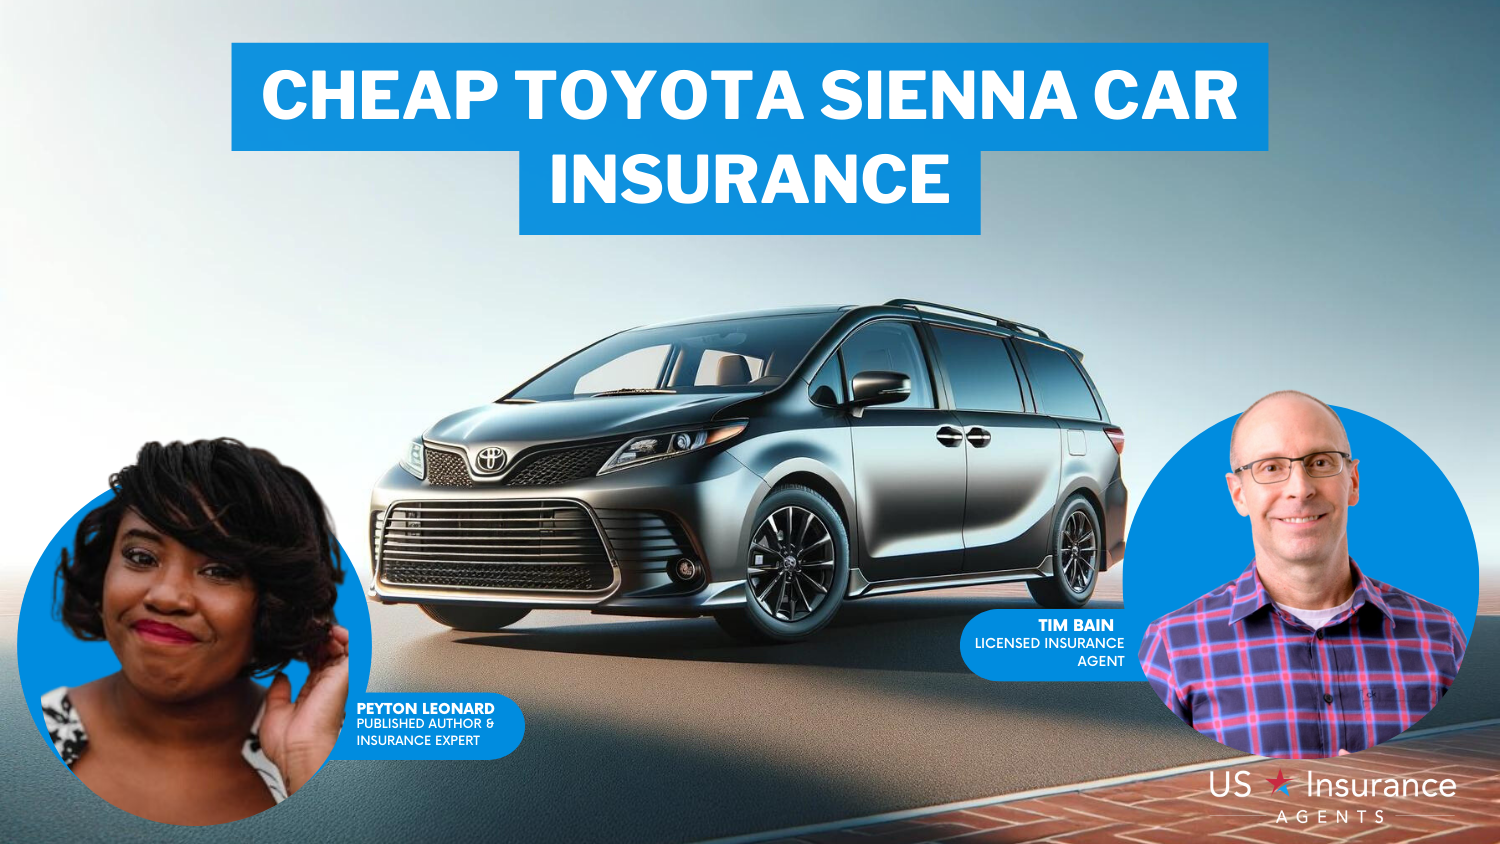 Cheap Toyota Sienna Car Insurance: State Farm, Allstate, and USAA